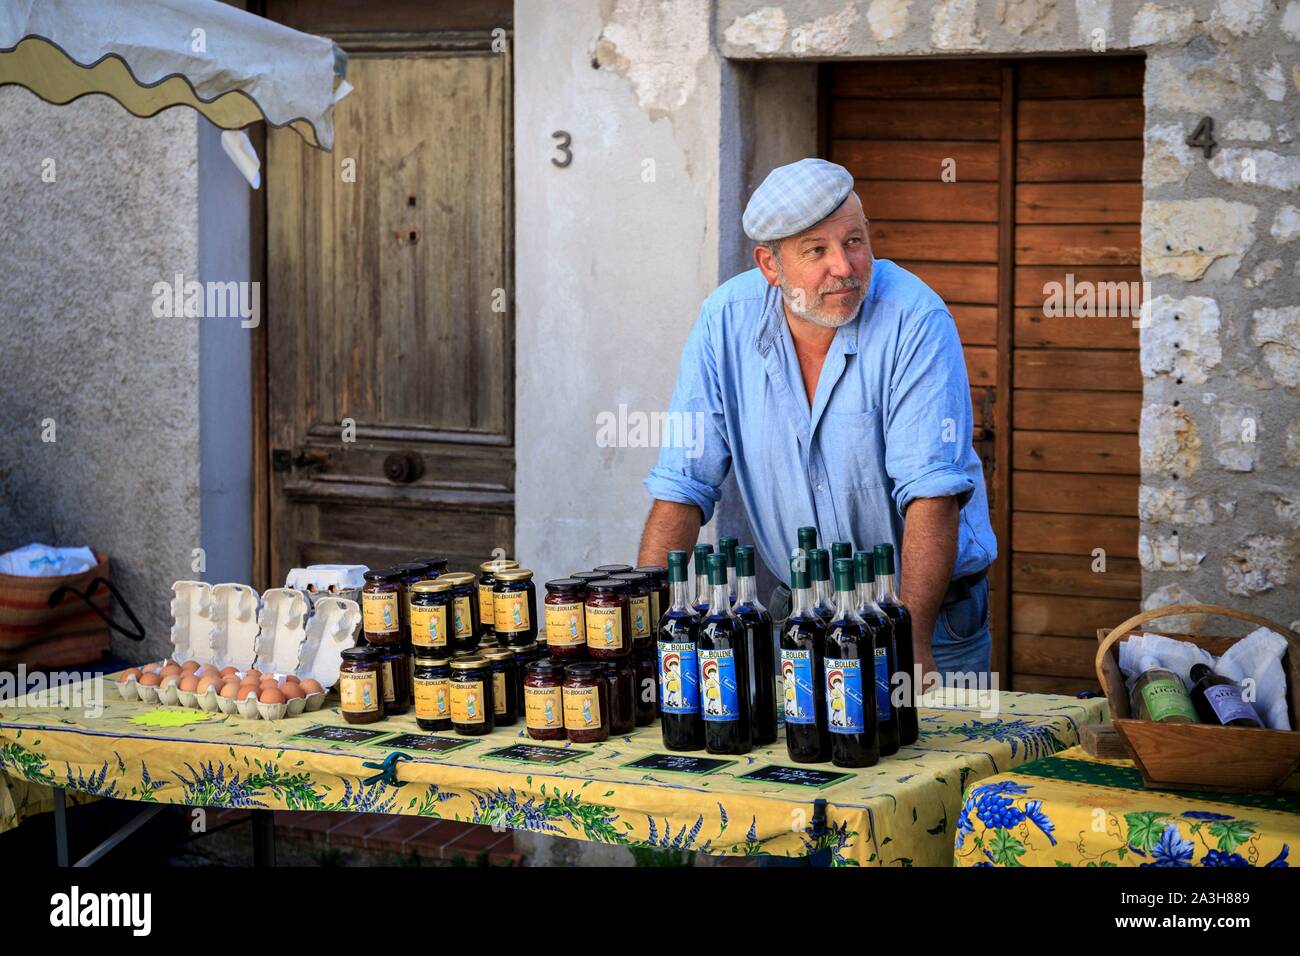 France, Alpes Maritimes, Parc Naturel Regional des Prealpes d'Azur, Gourdon, labeled Les Plus Beaux Villages de France, Farming party of Gorges du Loup, Philippe Raymondo organic producer at Bollene Vesubie, stalls of jars of jam and bottles of raspberry and blackcurrant syrup Stock Photo